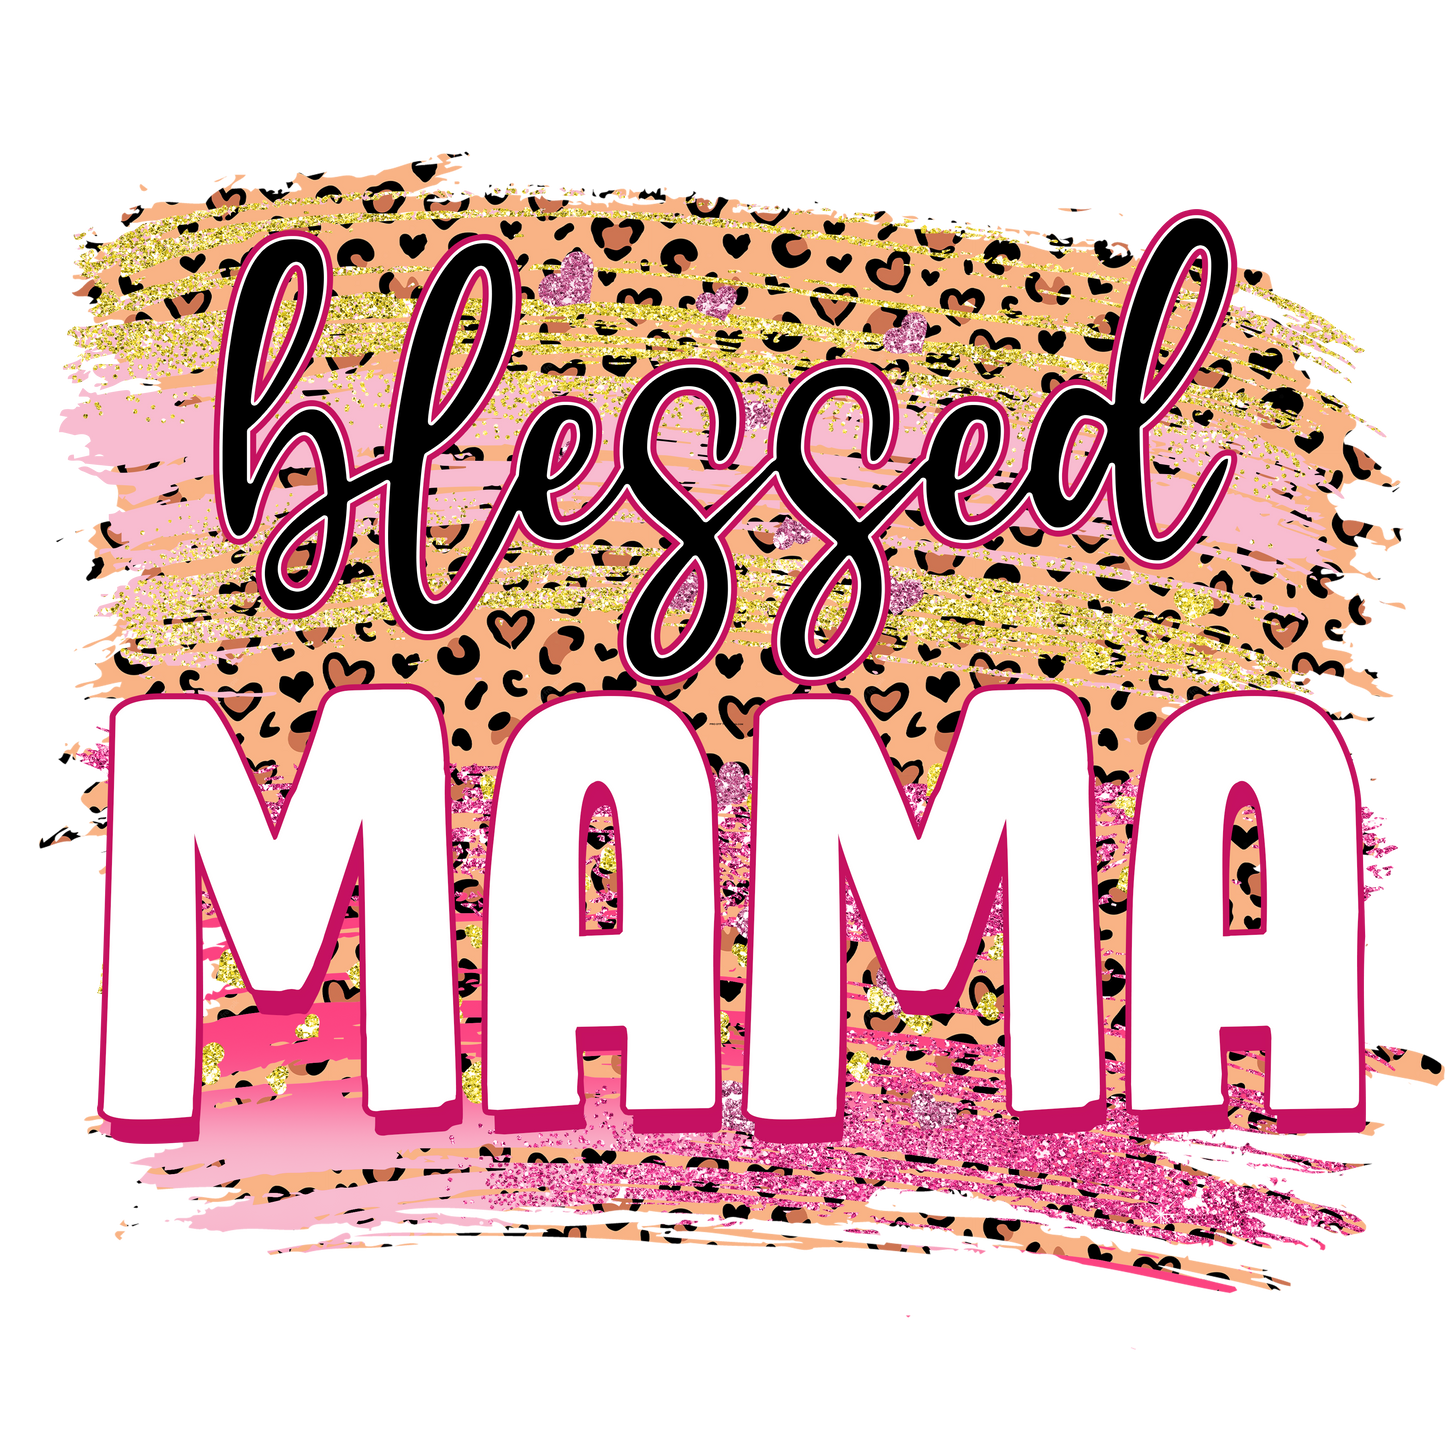 VD1 Blessed Mama Full Color Transfer - Pro DTF Transfers